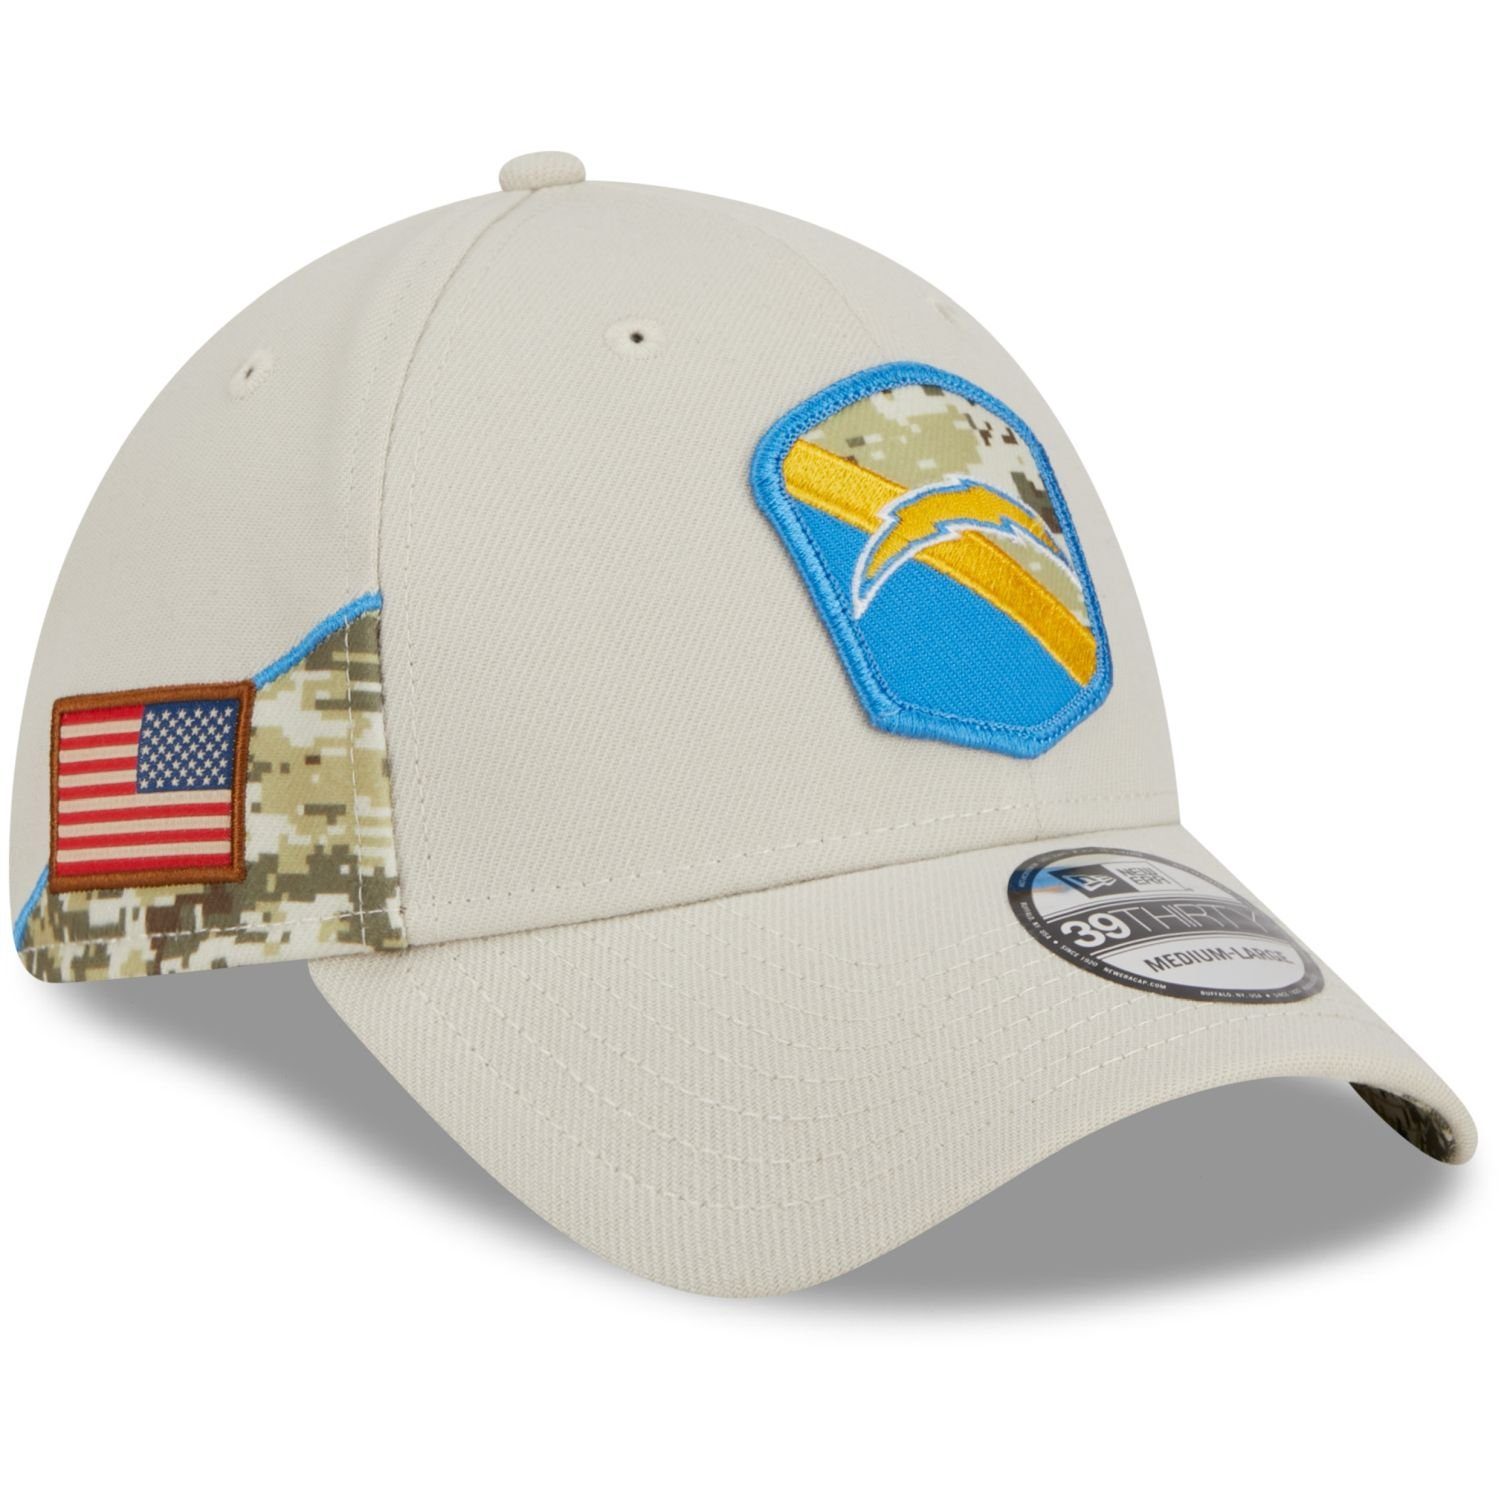 New Era Flex Cap 39Thirty StretchFit NFL Salute to Service Los Angeles Chargers